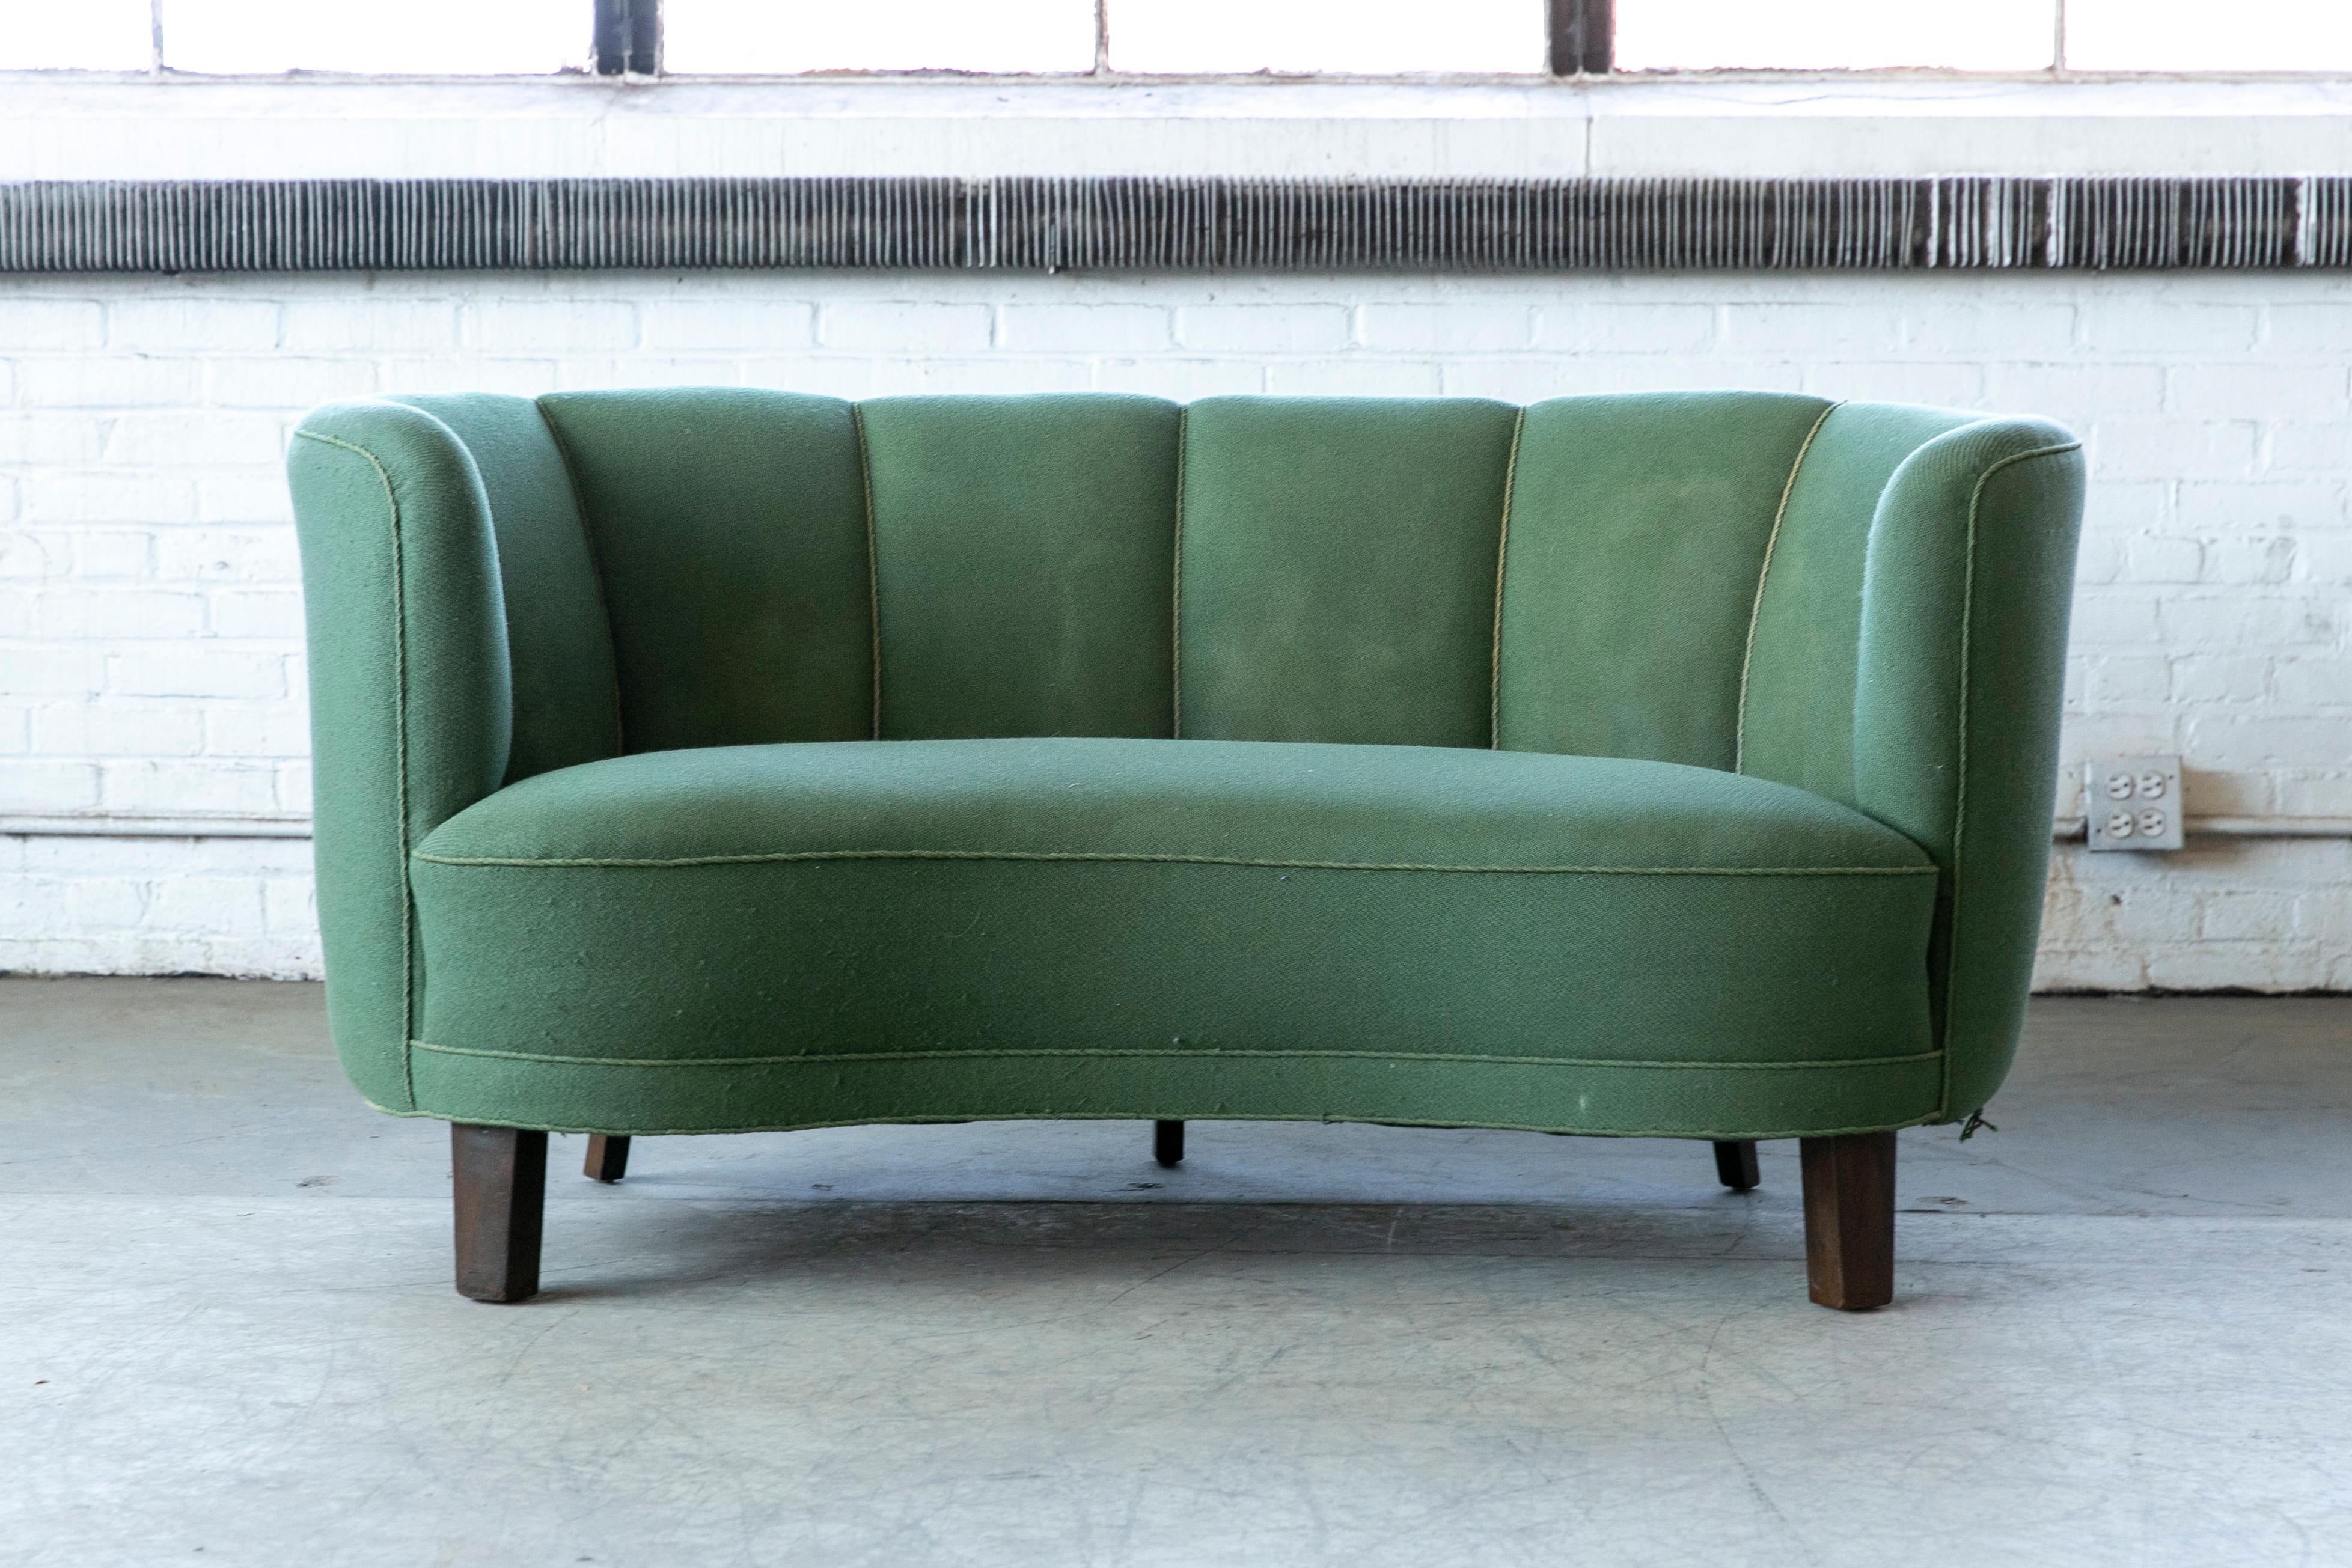 Beech Danish 1940s Channel Back Banana Form Curved Sofa or Loveseat in Green Wool